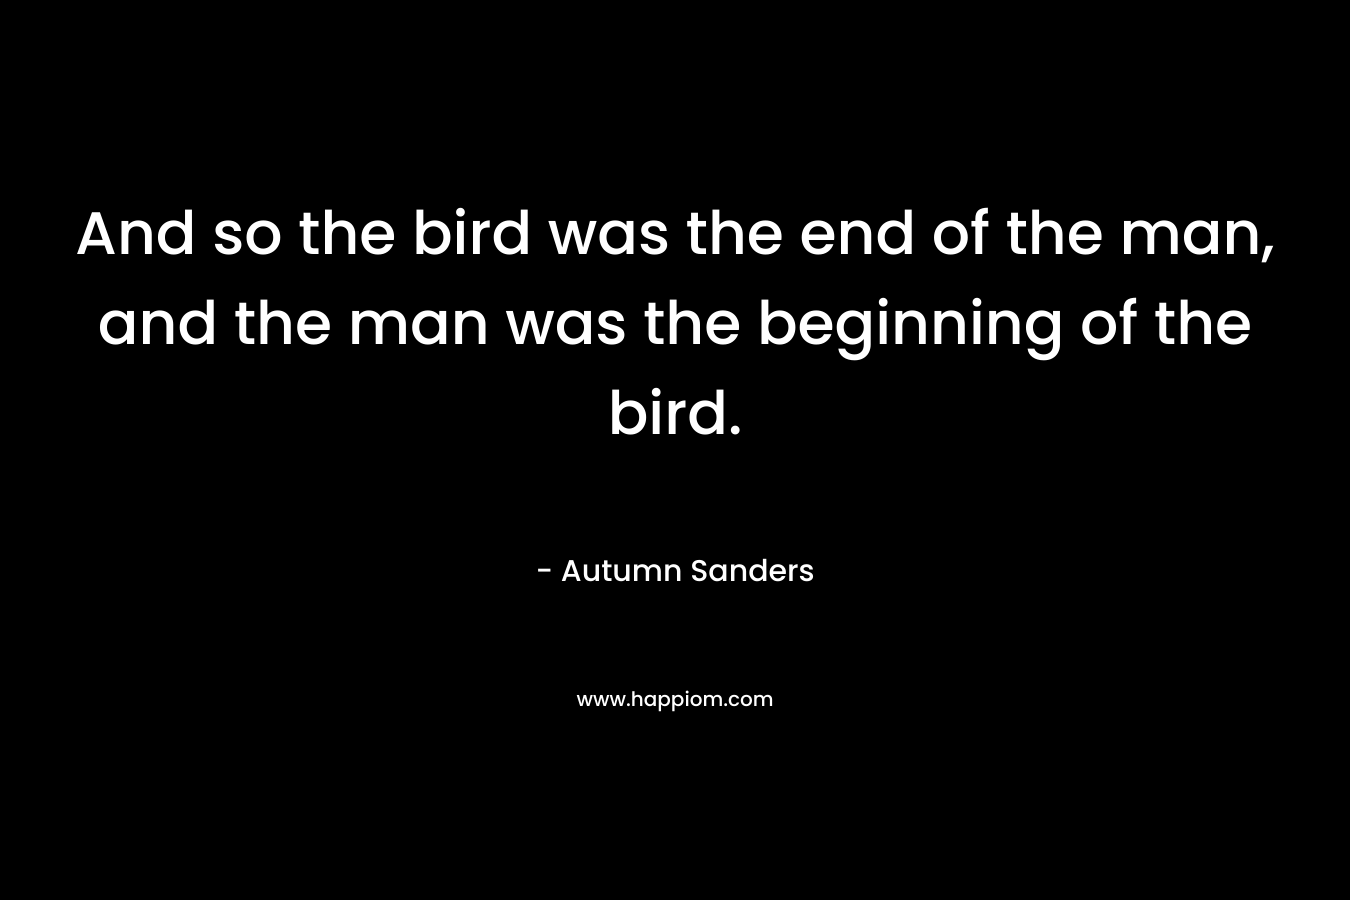 And so the bird was the end of the man, and the man was the beginning of the bird.